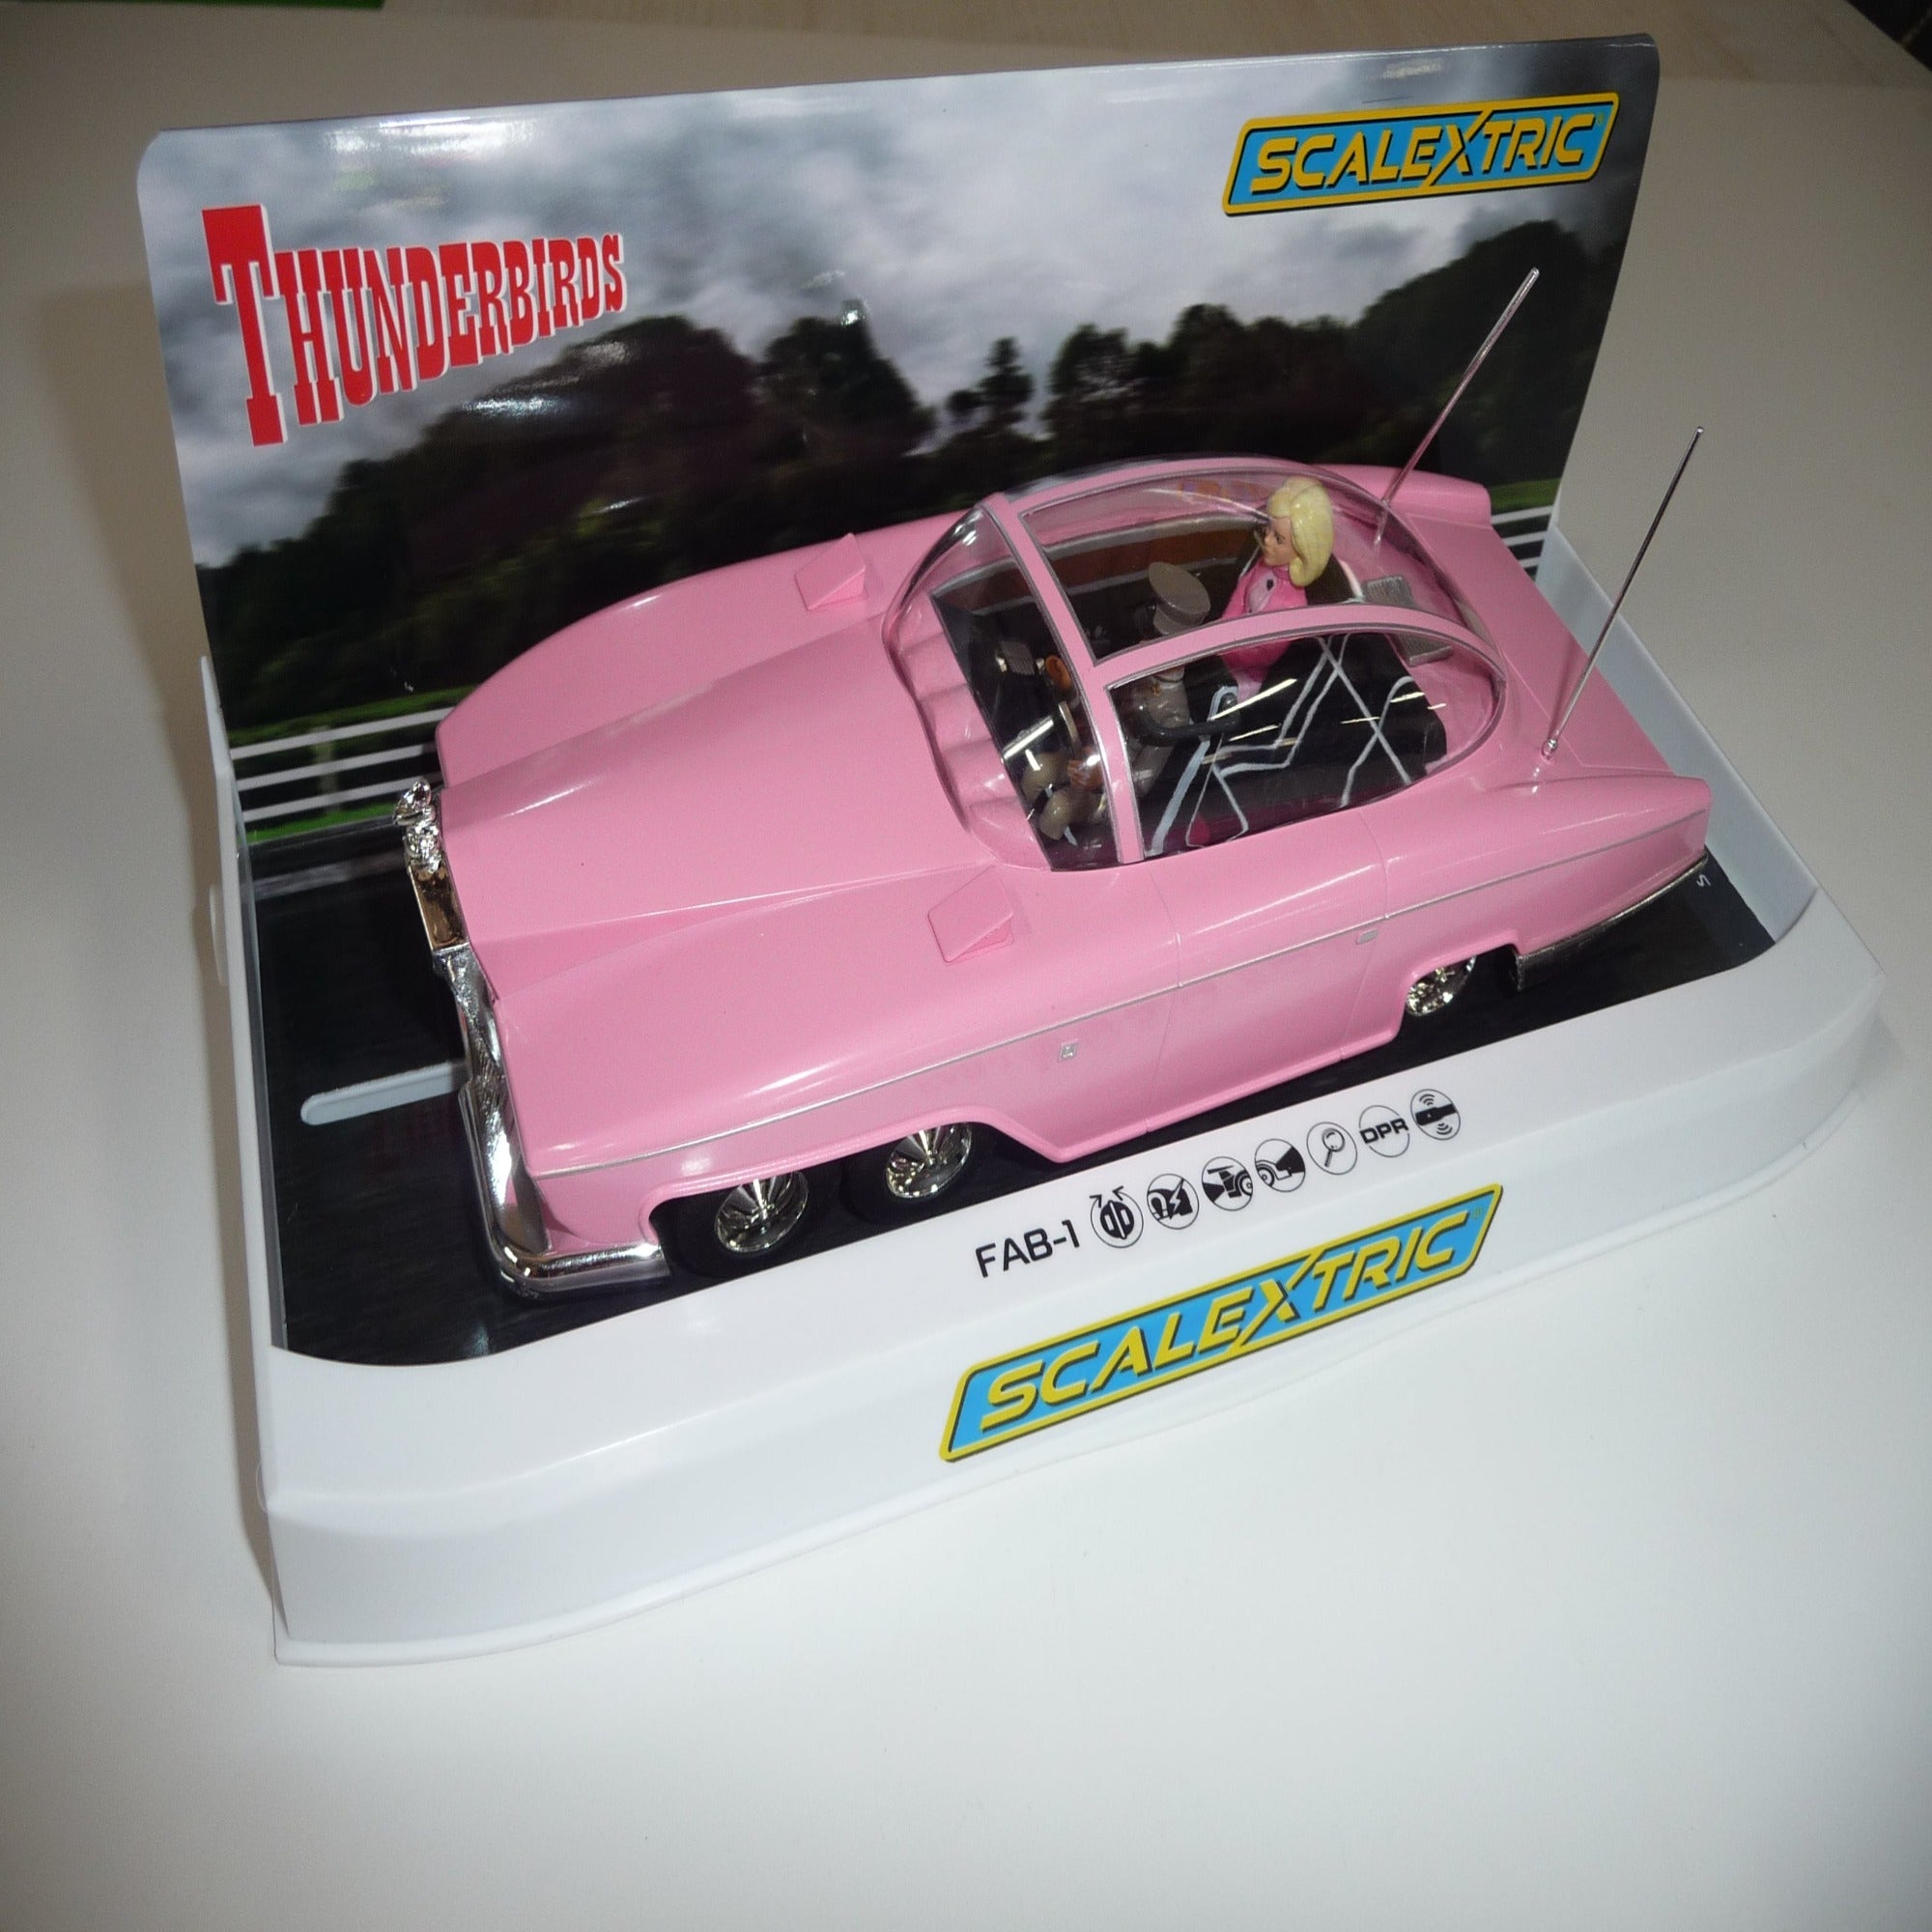 Scalextric Thunderbirds C4479 FAB-1 Free Postage on Orders over $40